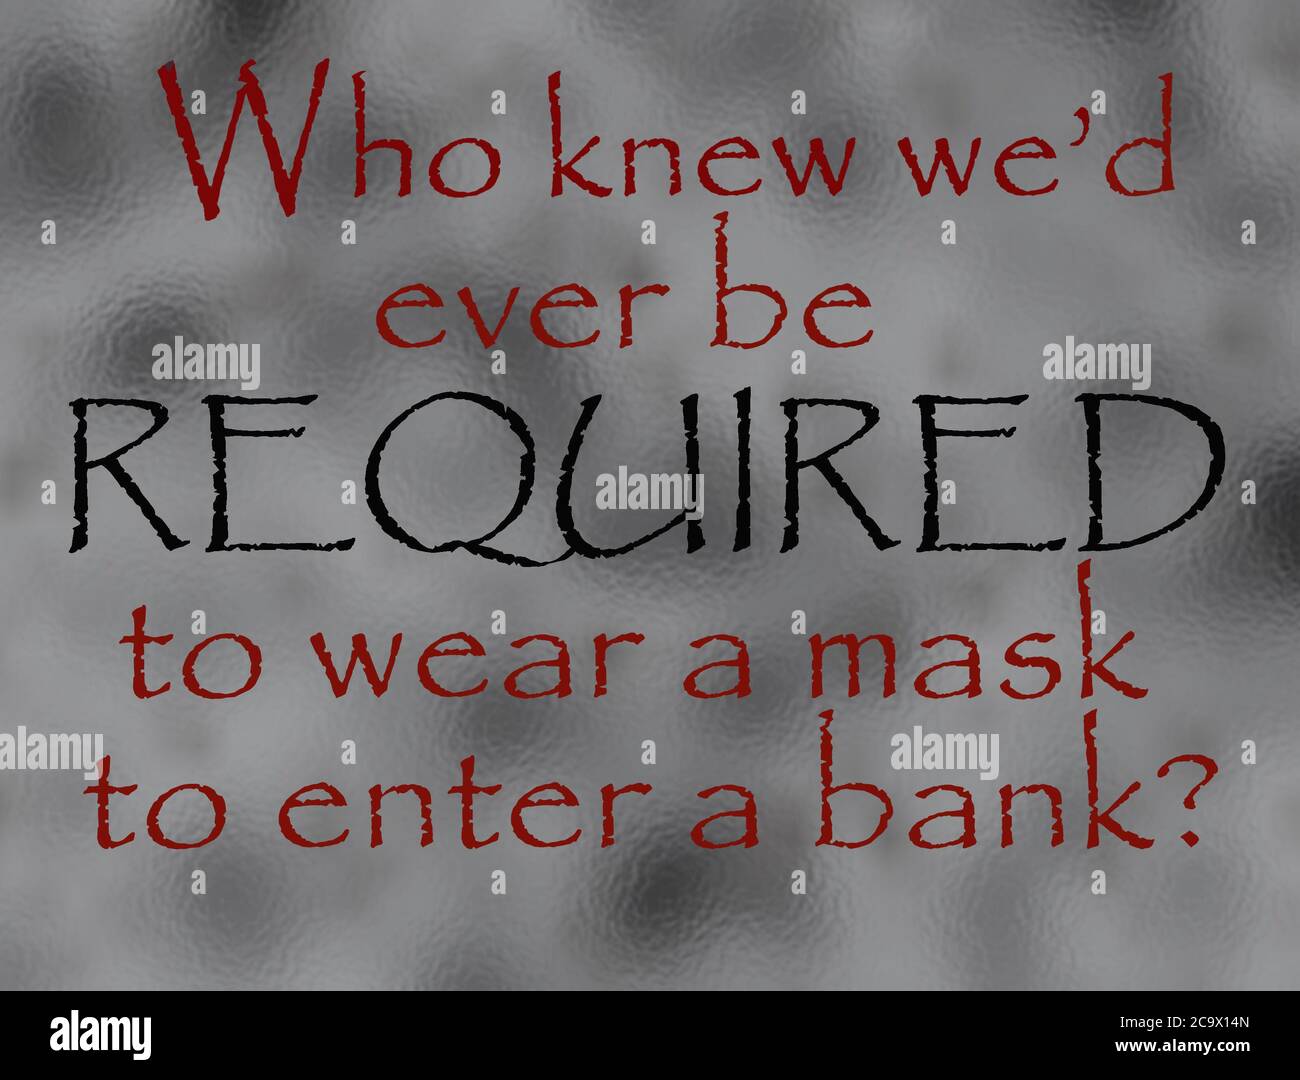 Text graphic, humorous insight into the incongruity of being required to wear a mask to enter a bank Stock Photo